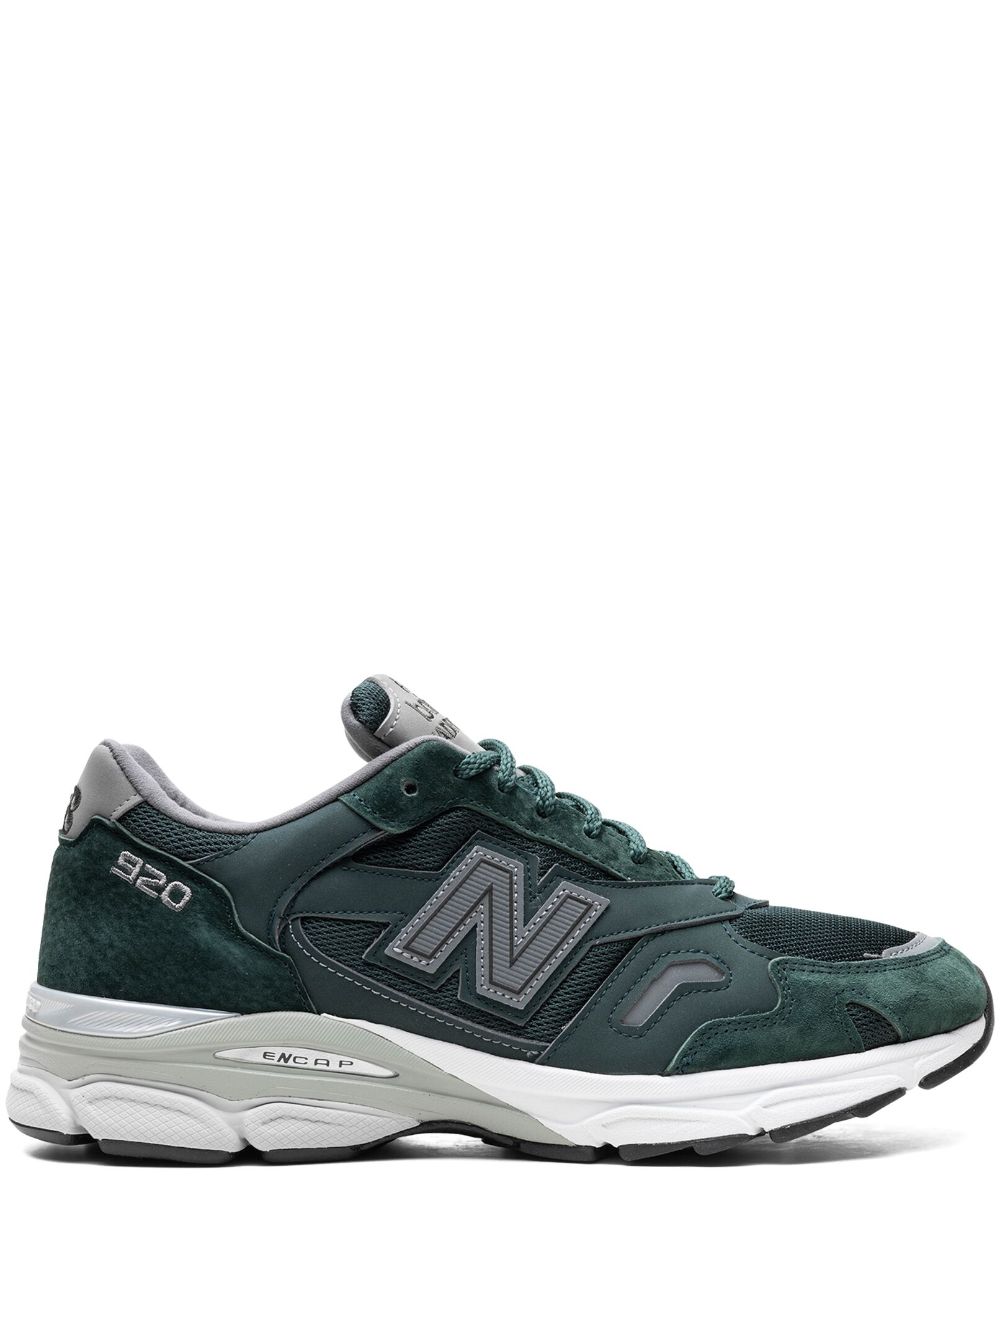 Image 1 of New Balance 920 "Kelly Green/Grey" sneakers